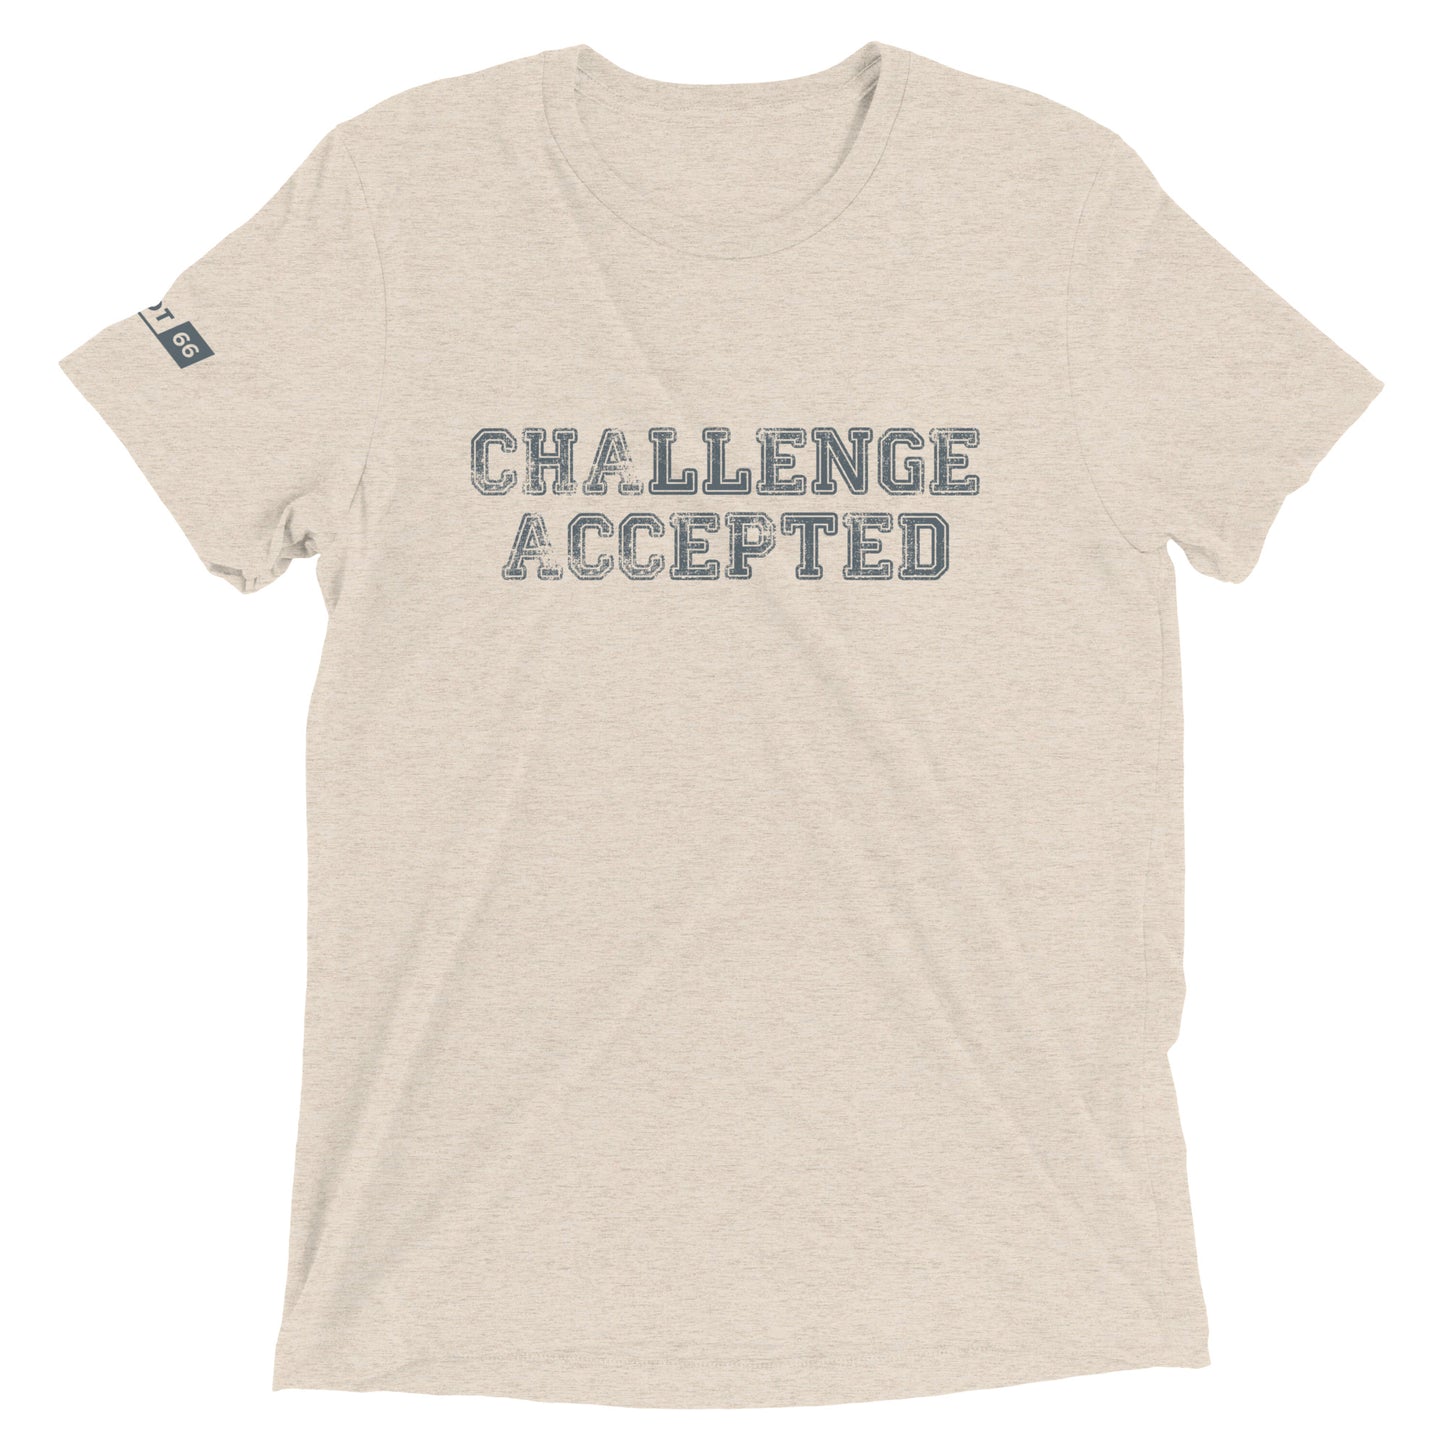 Reboot 66 - Challenge Accepted Short sleeve t-shirt